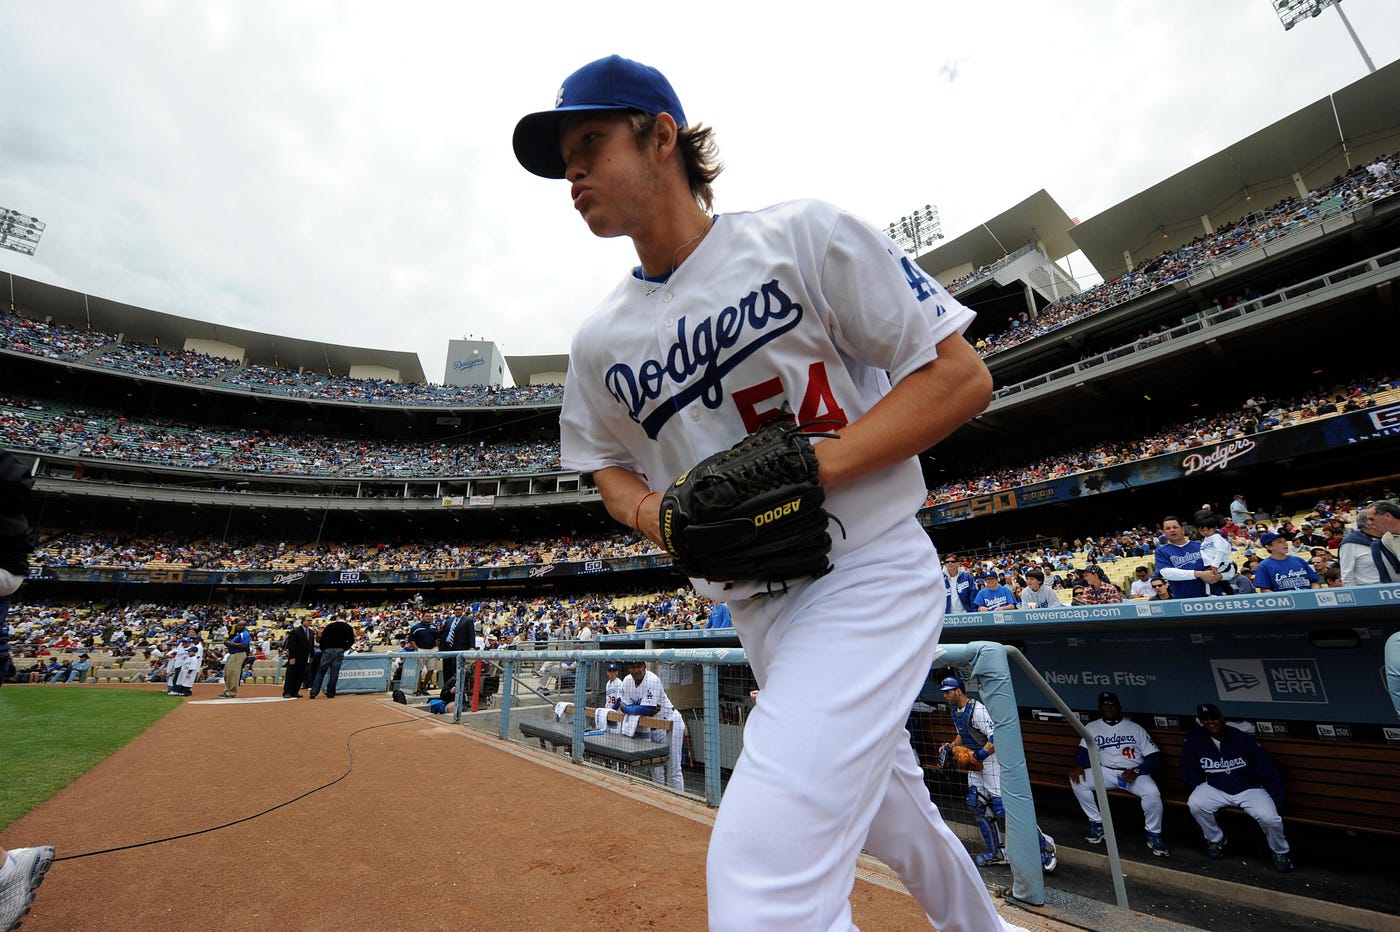 Welcome to the bigs: The story of Cody Bellinger's MLB debut, by Cary  Osborne